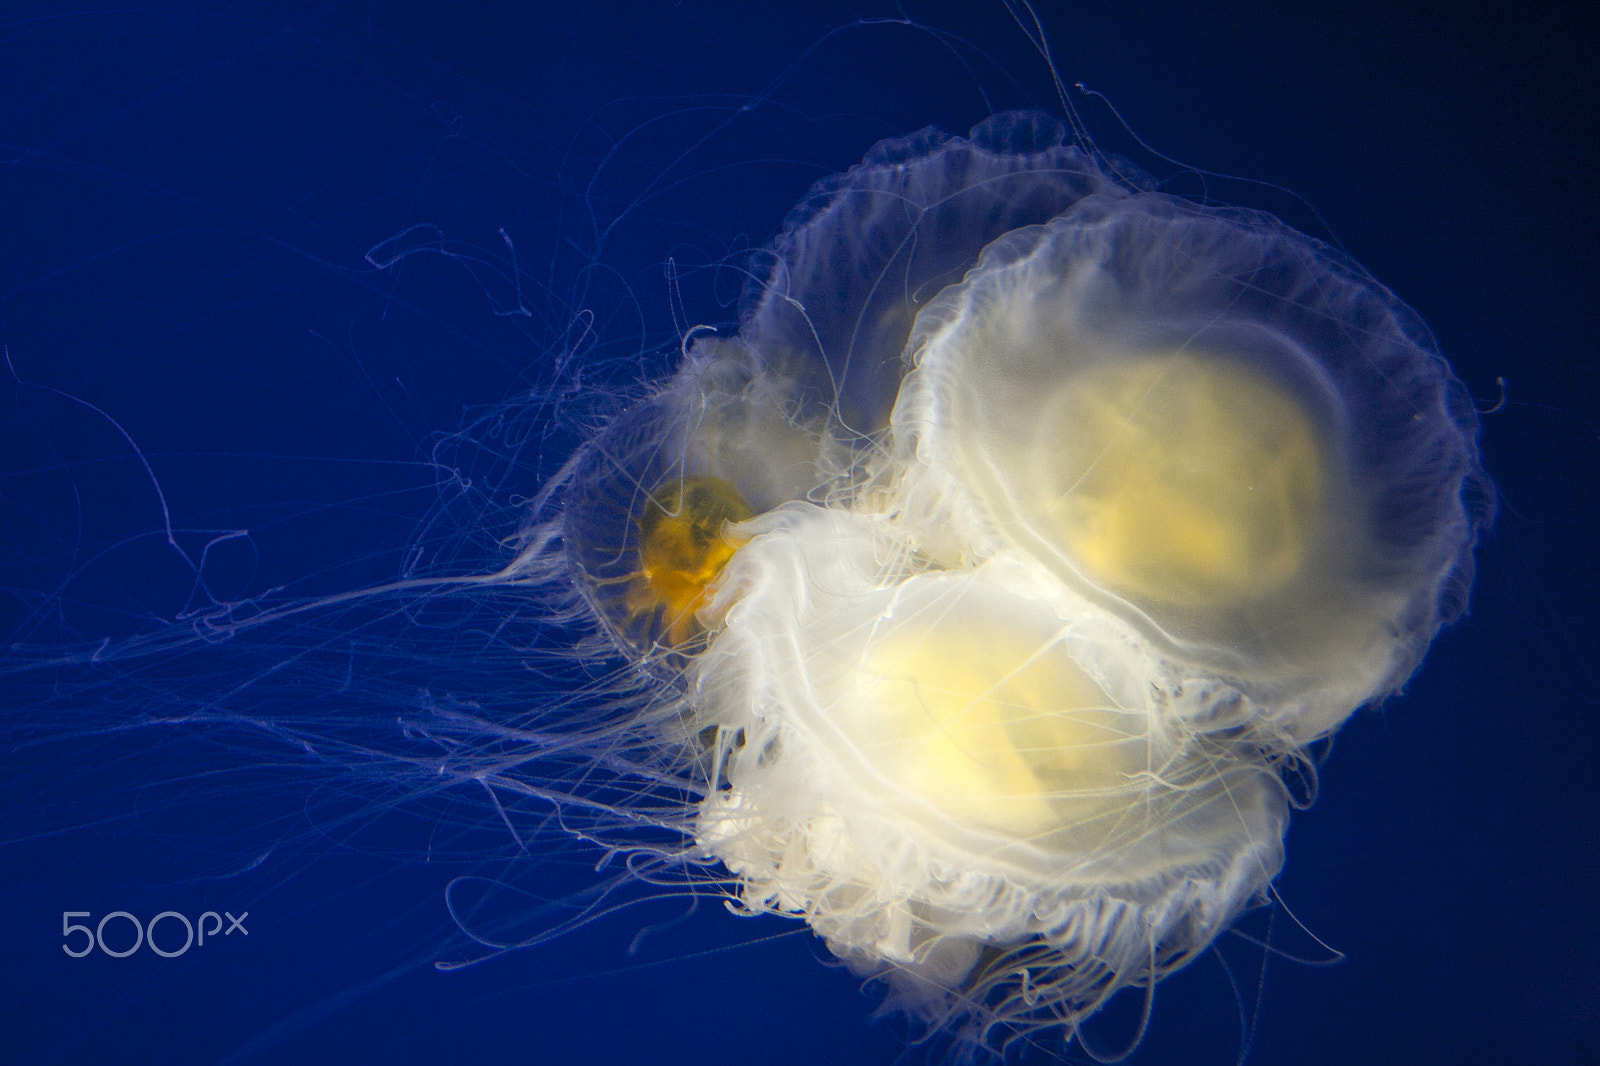 Canon EOS 40D sample photo. Deep blue and the jellyfish photography